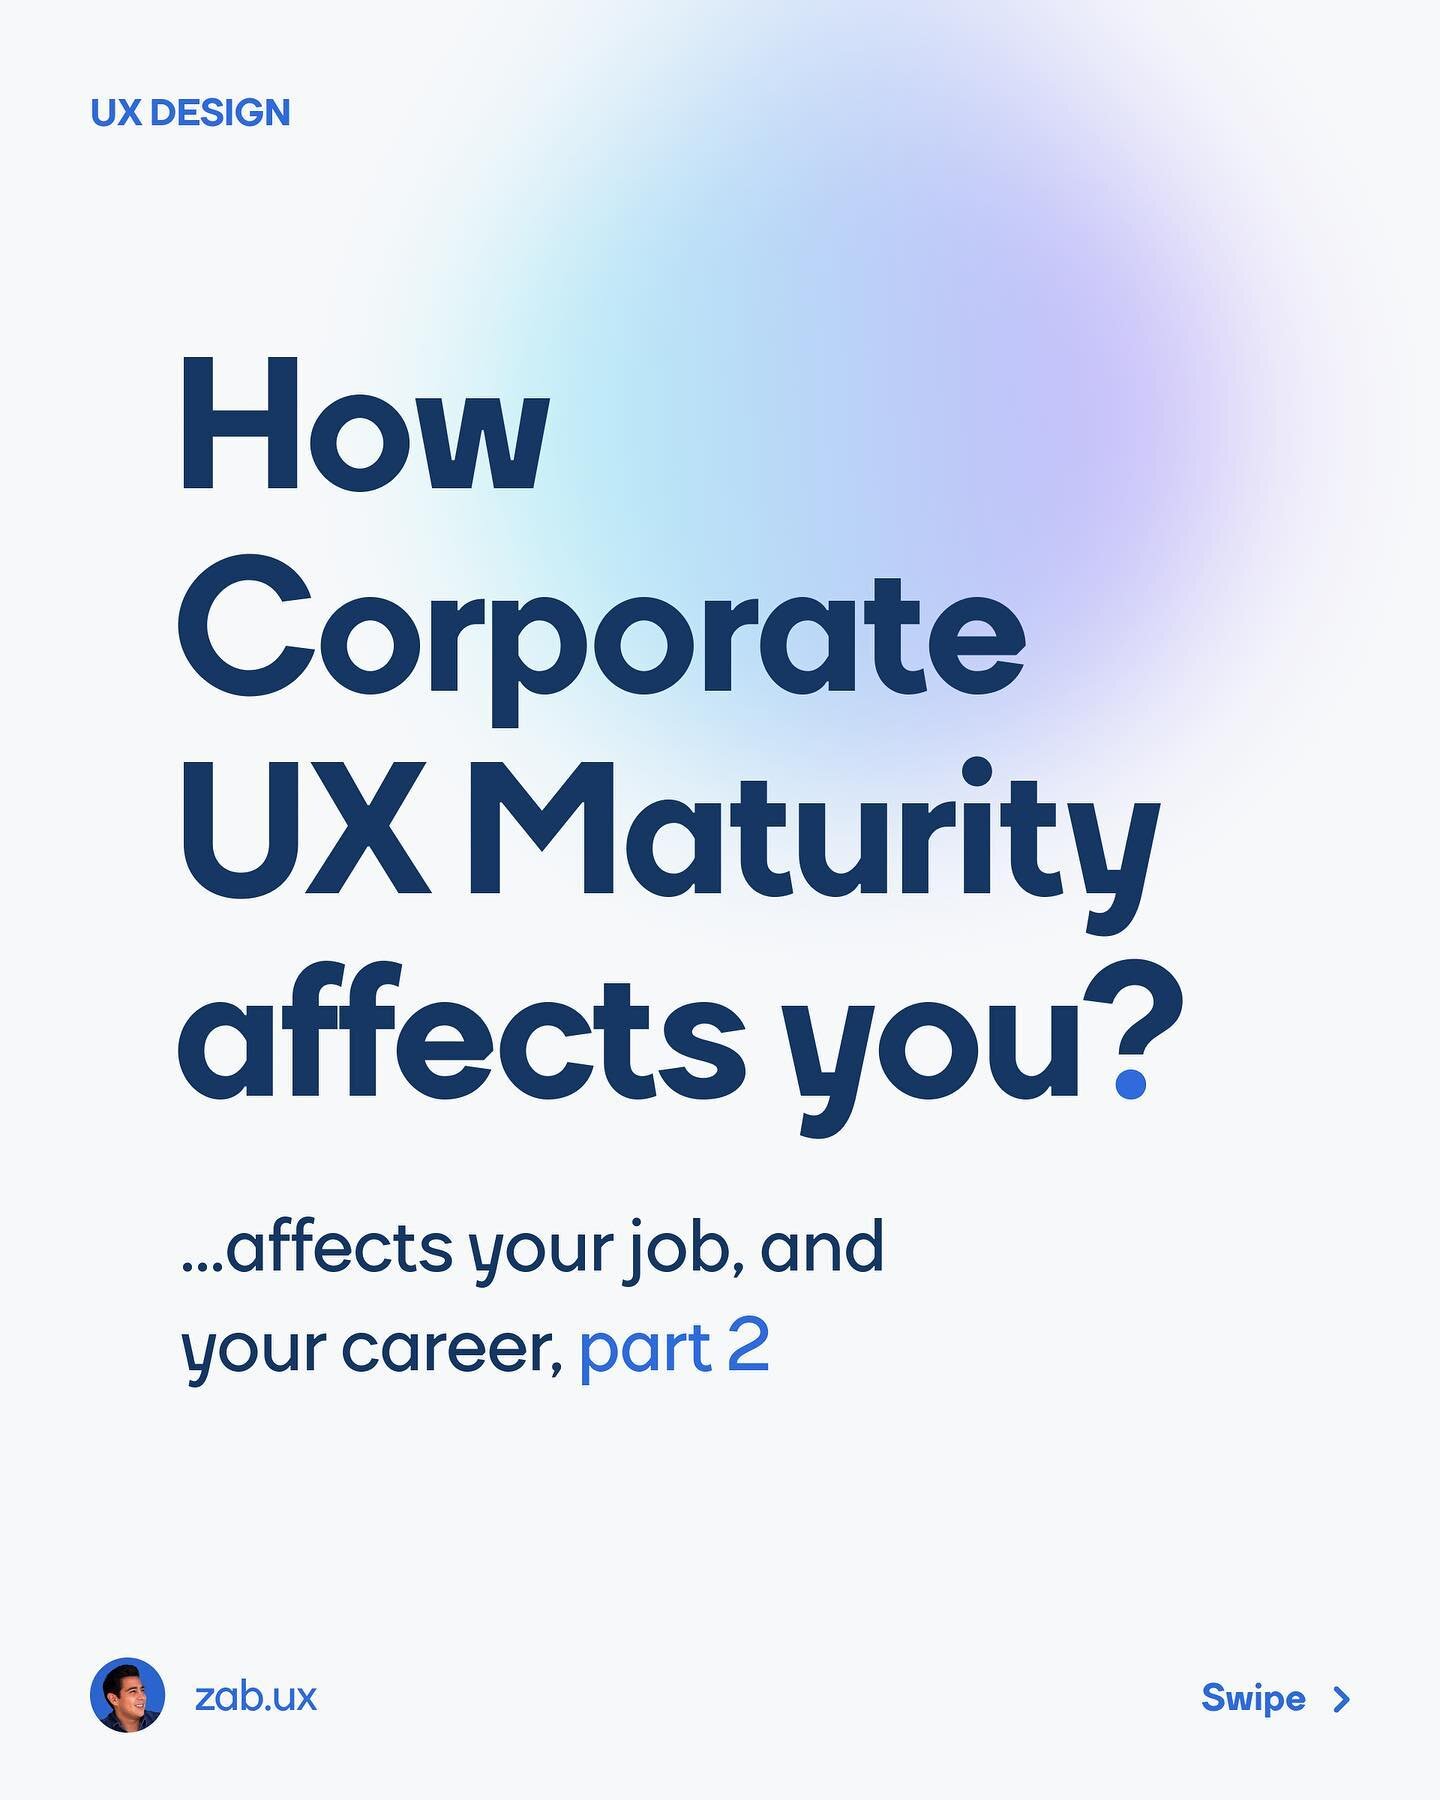 Continuing our conversation about UX maturity, Here is the last stages 5-8 here is where you will fond companies with a deeper understanding of UX and how is applied in their organization.
.
.

If you want more info about UX maturity make sure you vi